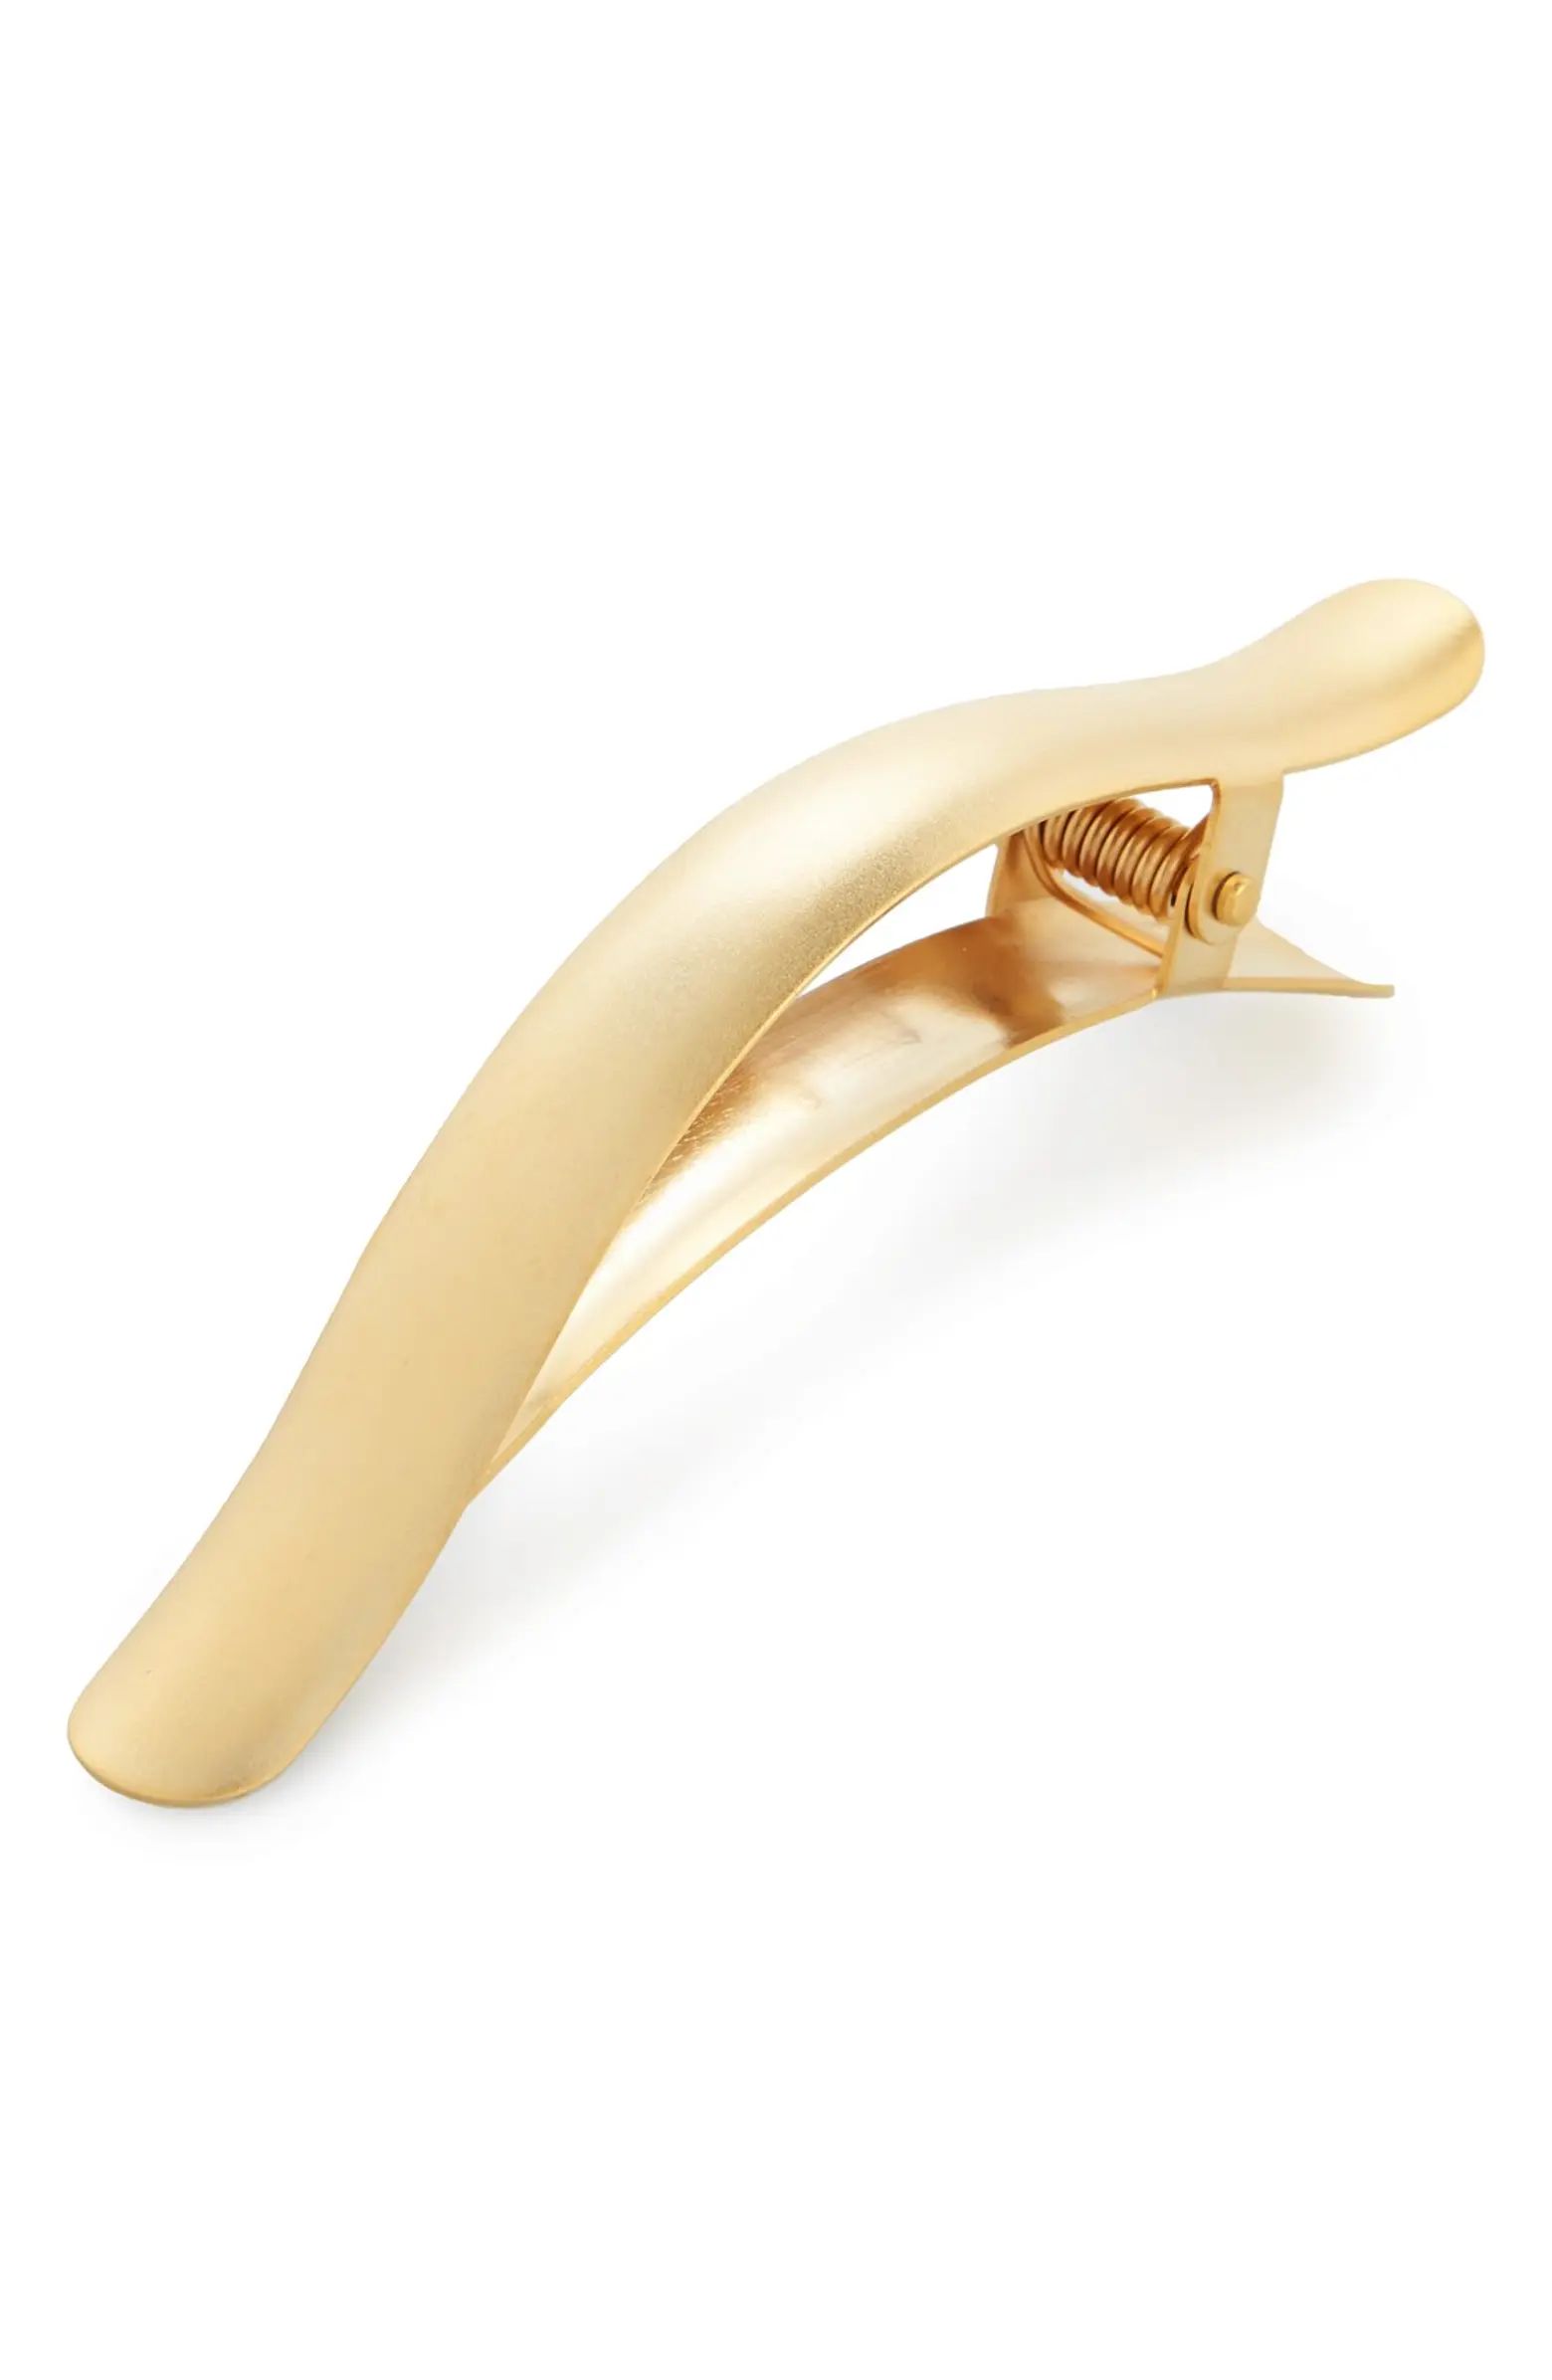 'Ficcarissimo' Hair Clip | Nordstrom